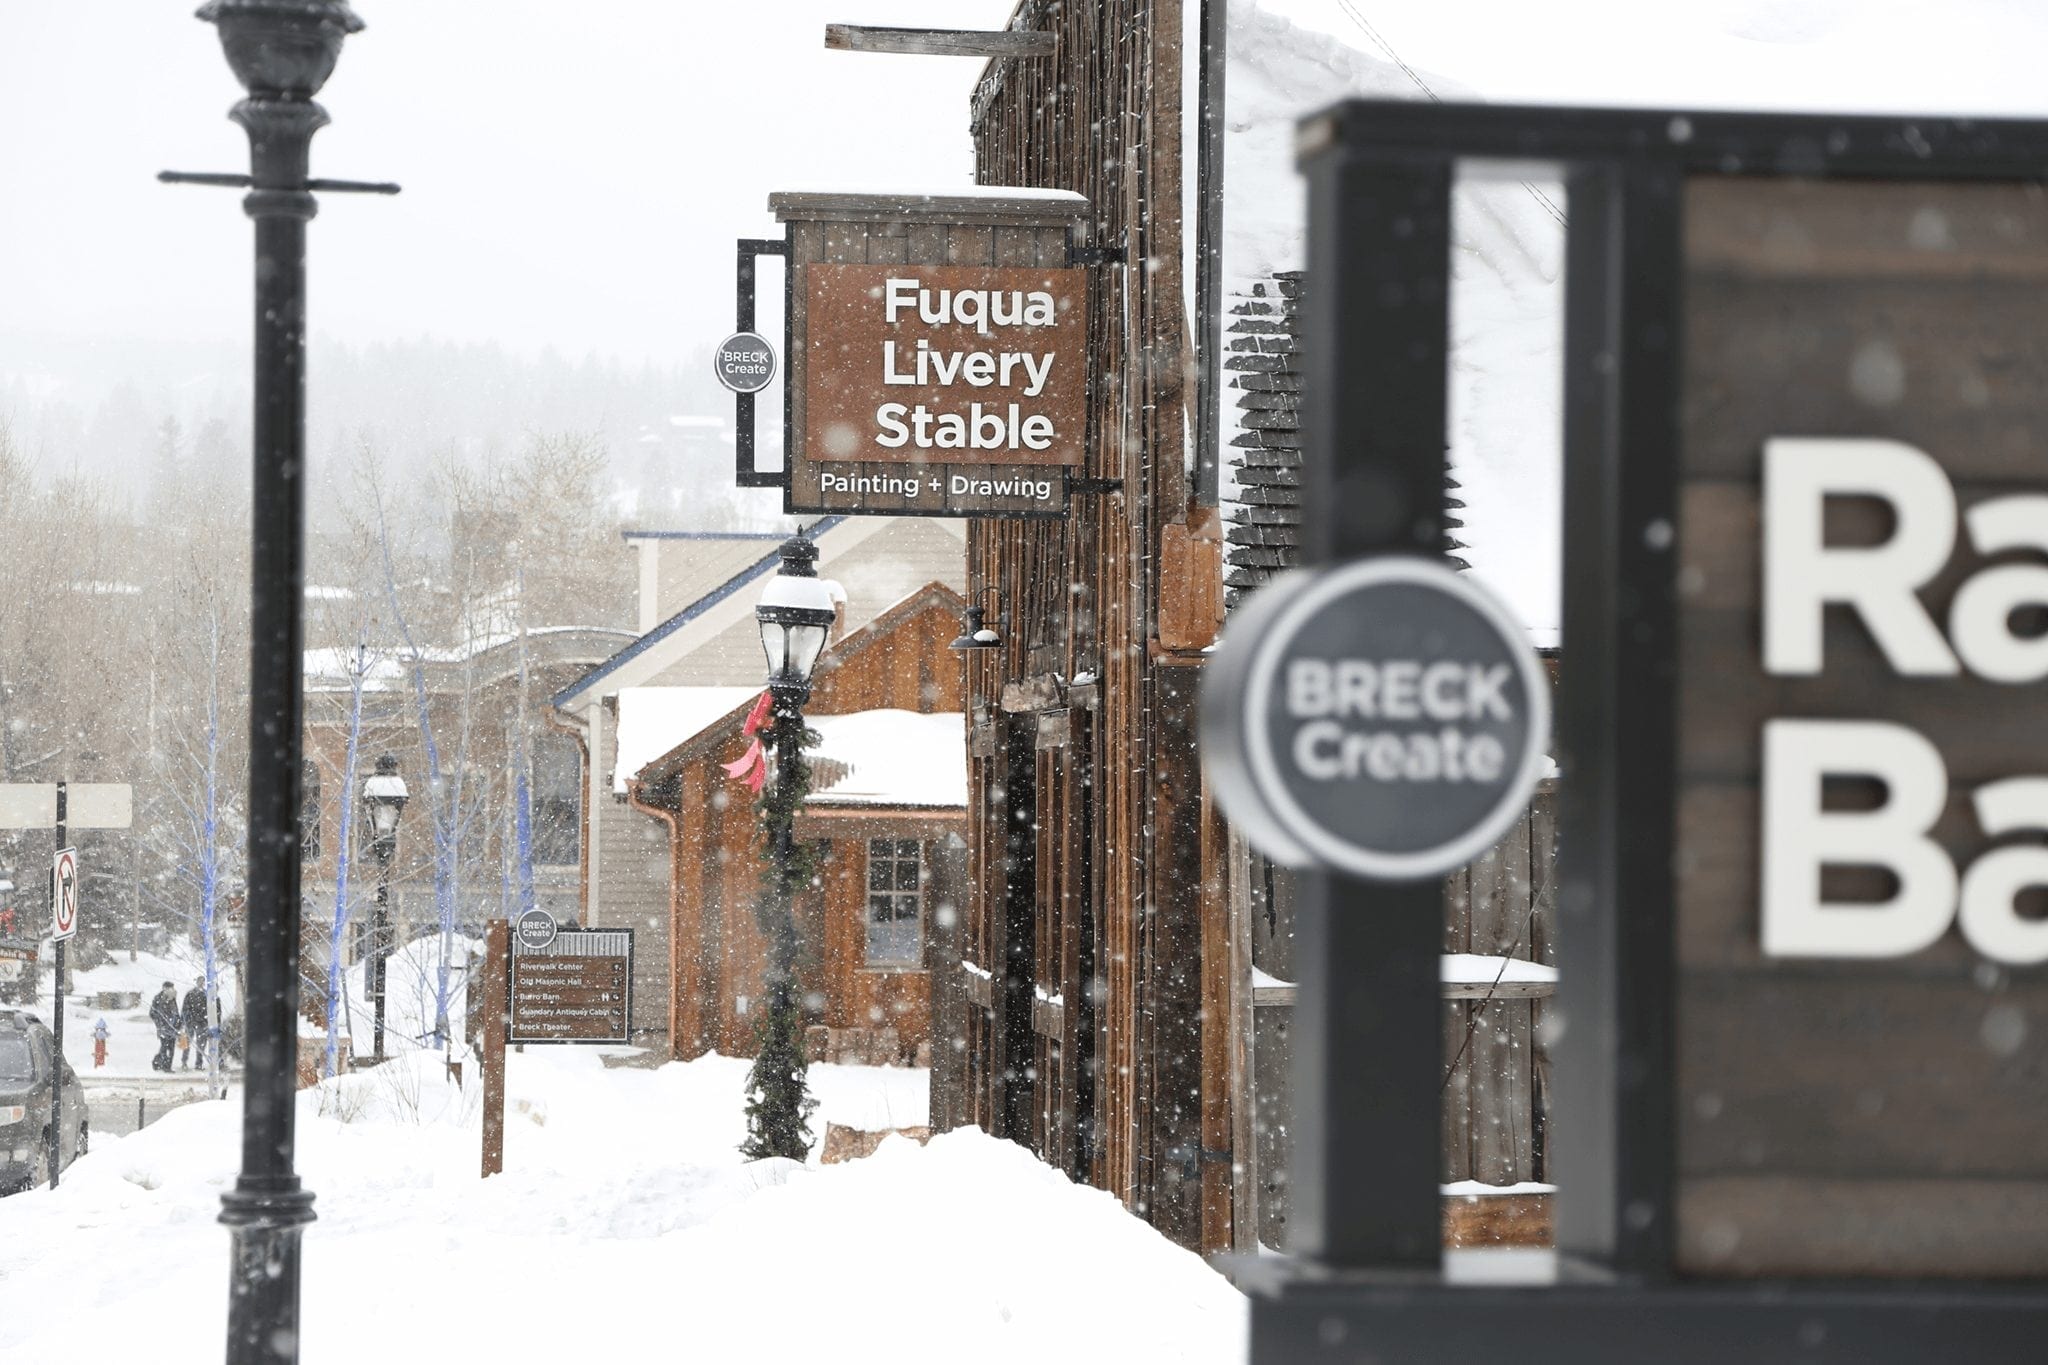 Fuqua Livery Stable in Downtown Breckenridge with Snow Falling